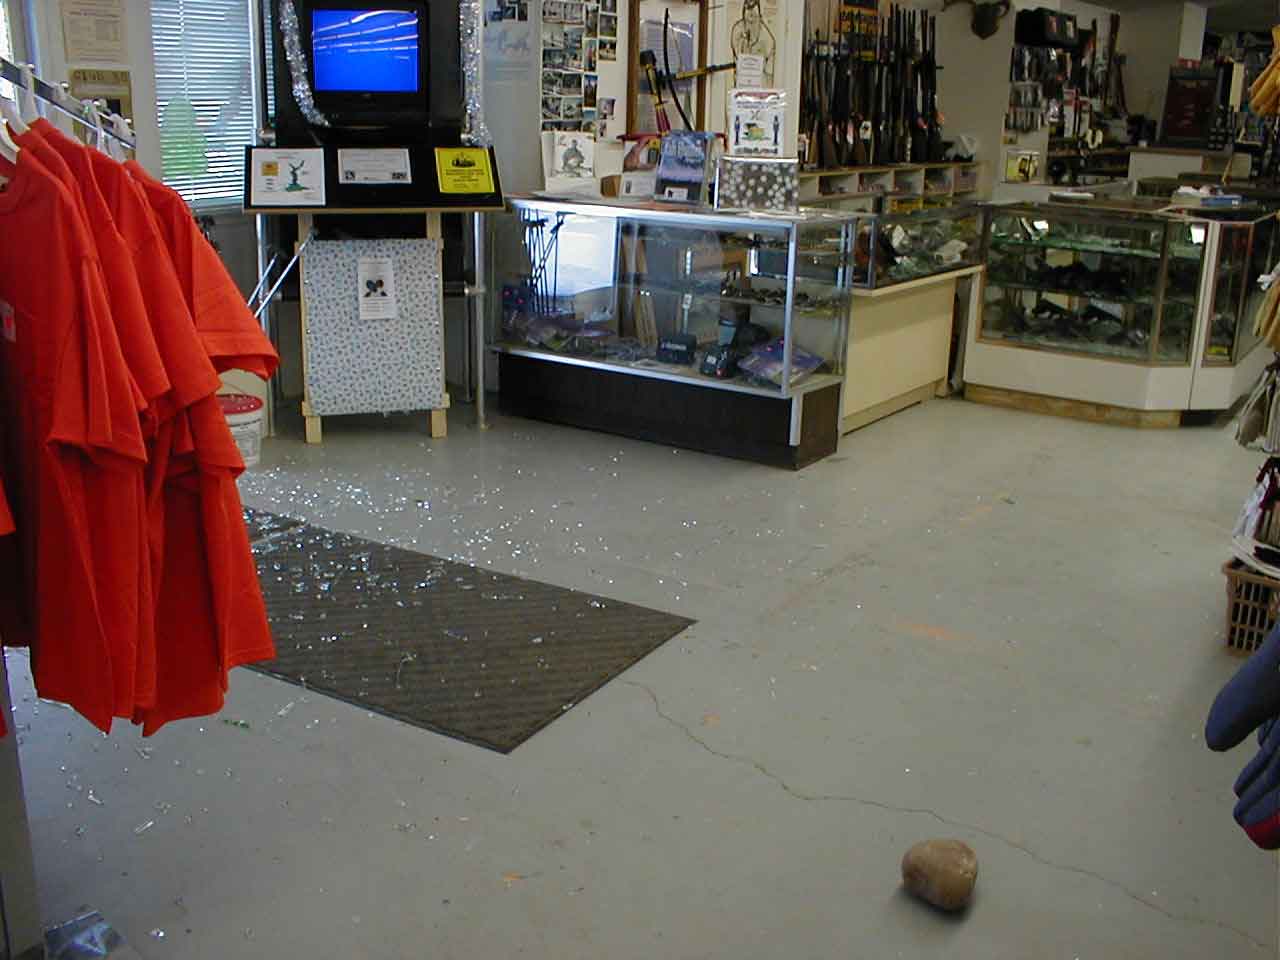 Interior shot of the store with a rock used to break the glass left behind and broken glass on the floor